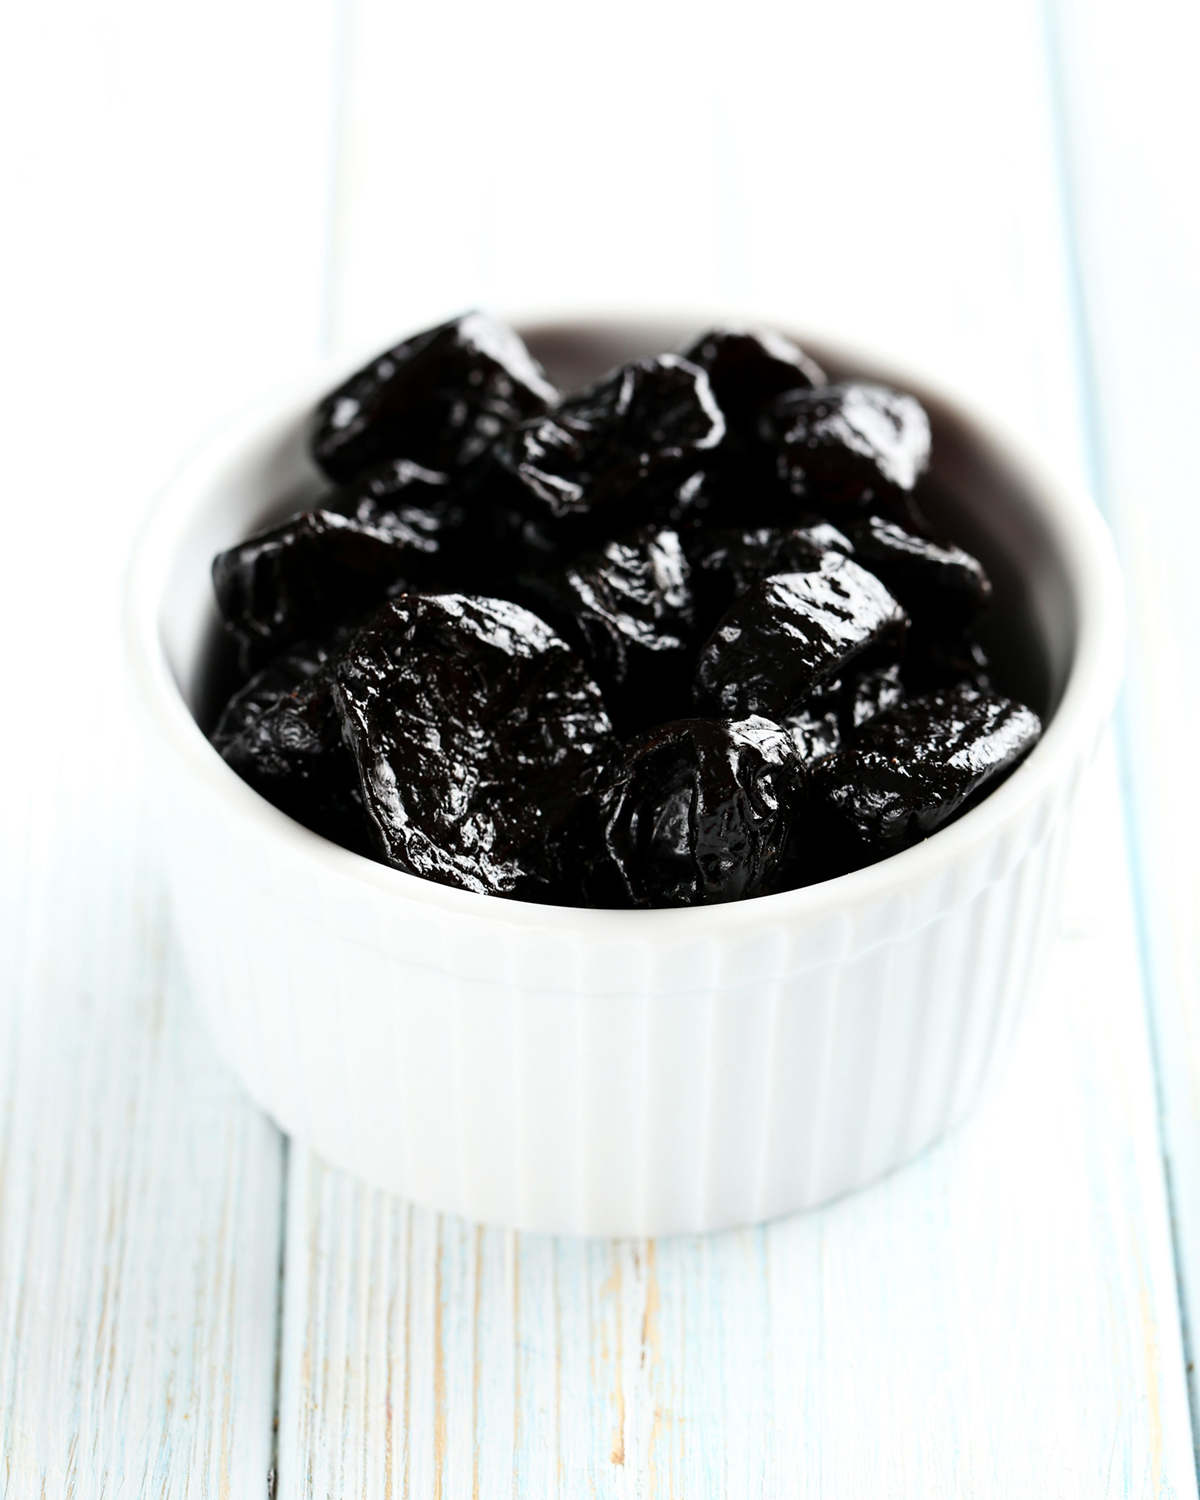 How to choose the best dried pruned for prune puree.